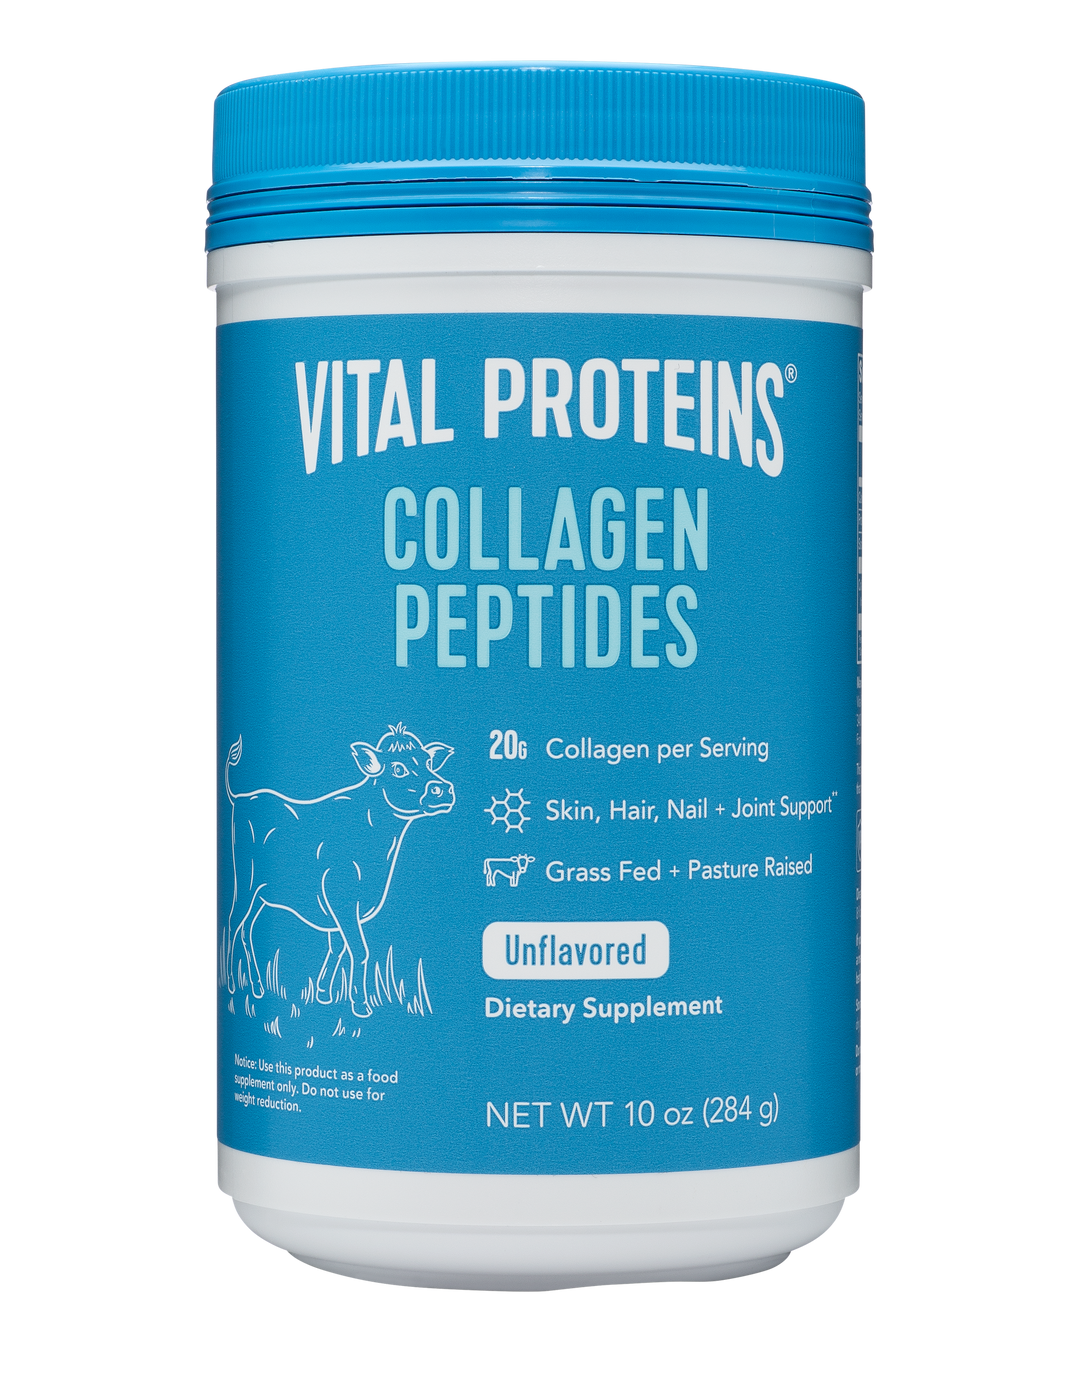 Vital Proteins Collagen Peptides Canister-10 oz.-12/Case